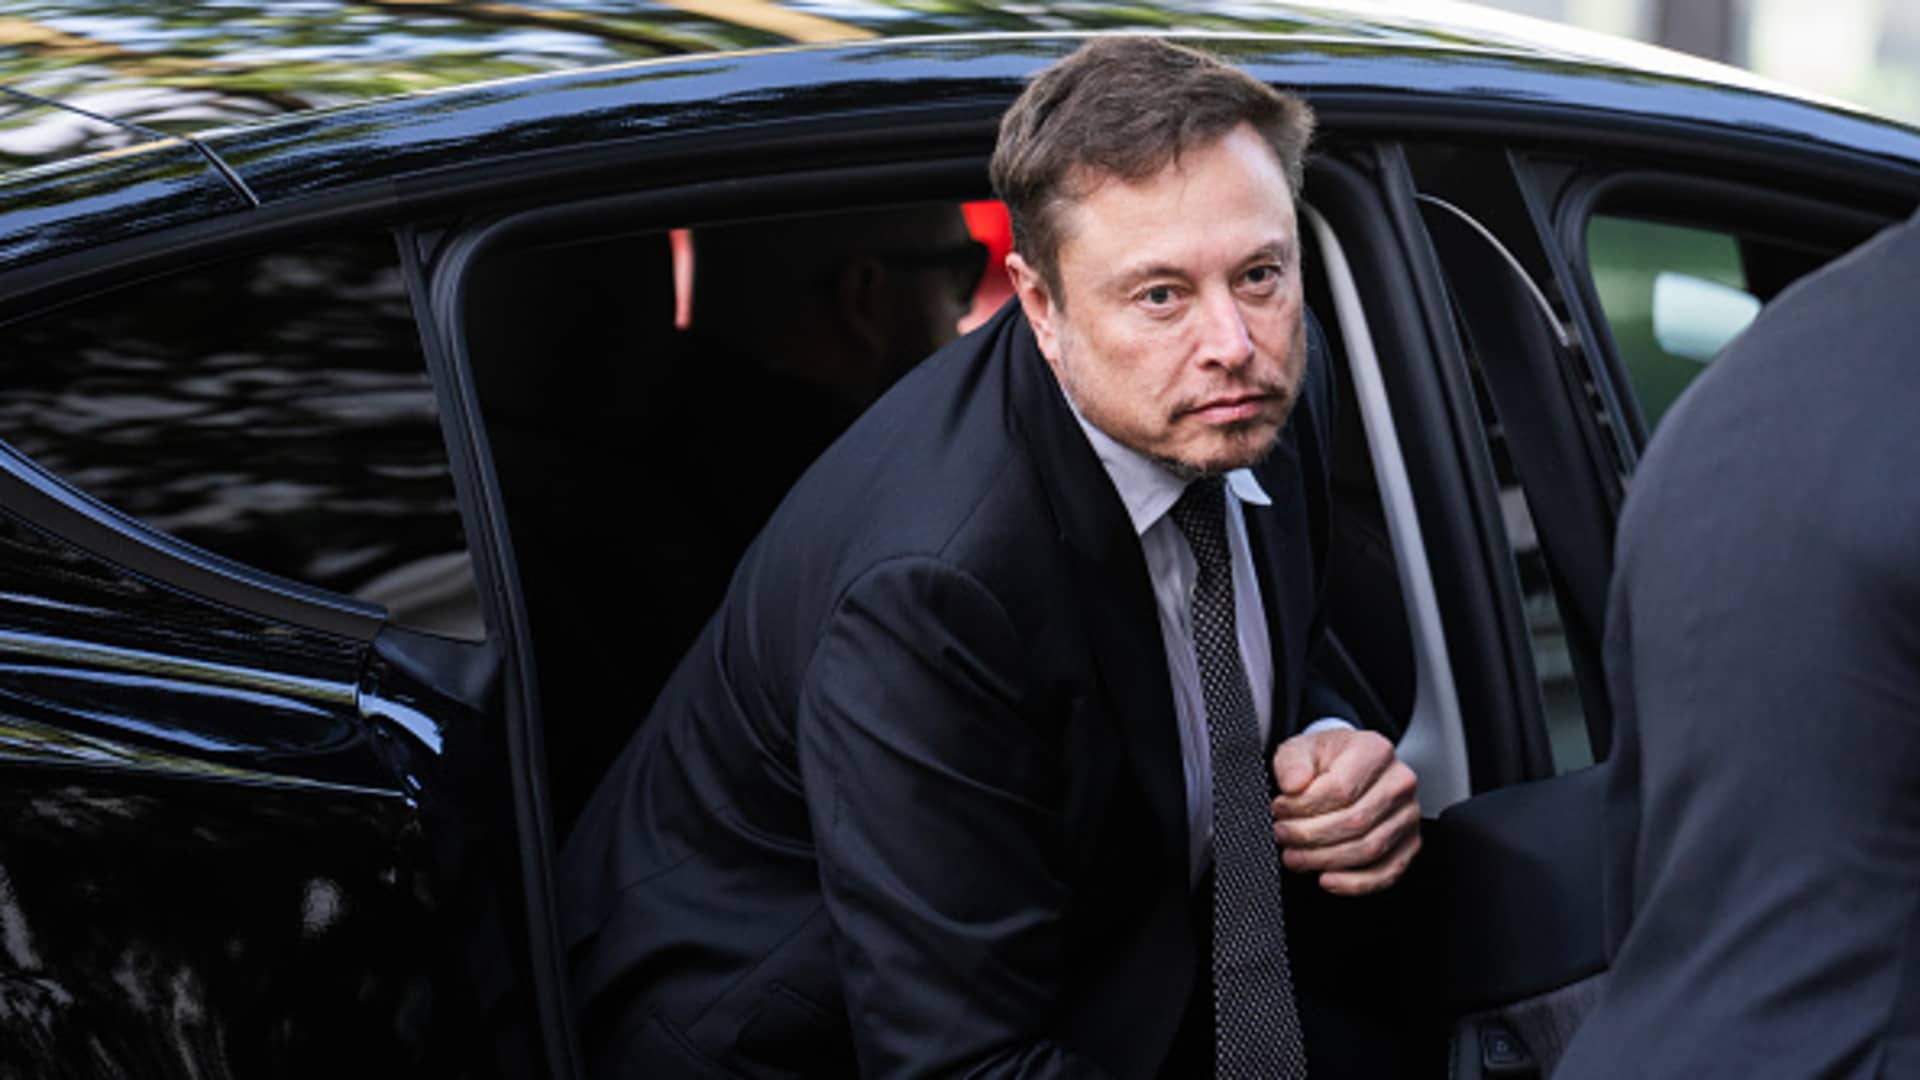 Elon Musk boosts antisemitic tweet, claims ADL and different teams push ‘anti-white’ messaging